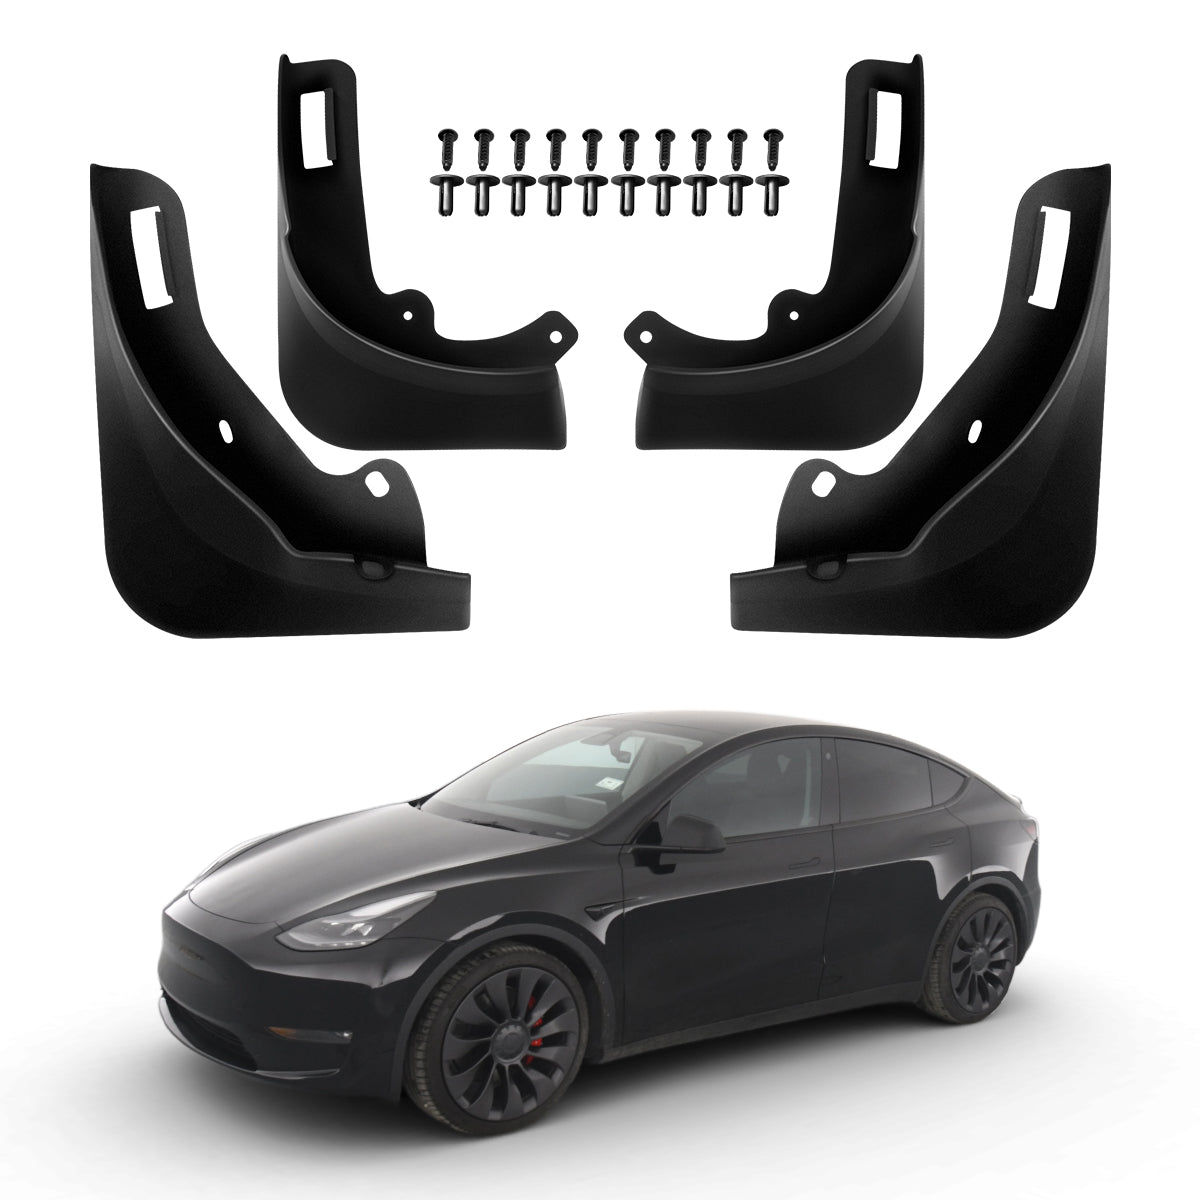 Lasfit Mud Flaps for Tesla Model Y 2020-2023 No Drilling Required Splash Guards Matte Fender Upgraded PP Material Accessories Fit 5 Seater Car - Set